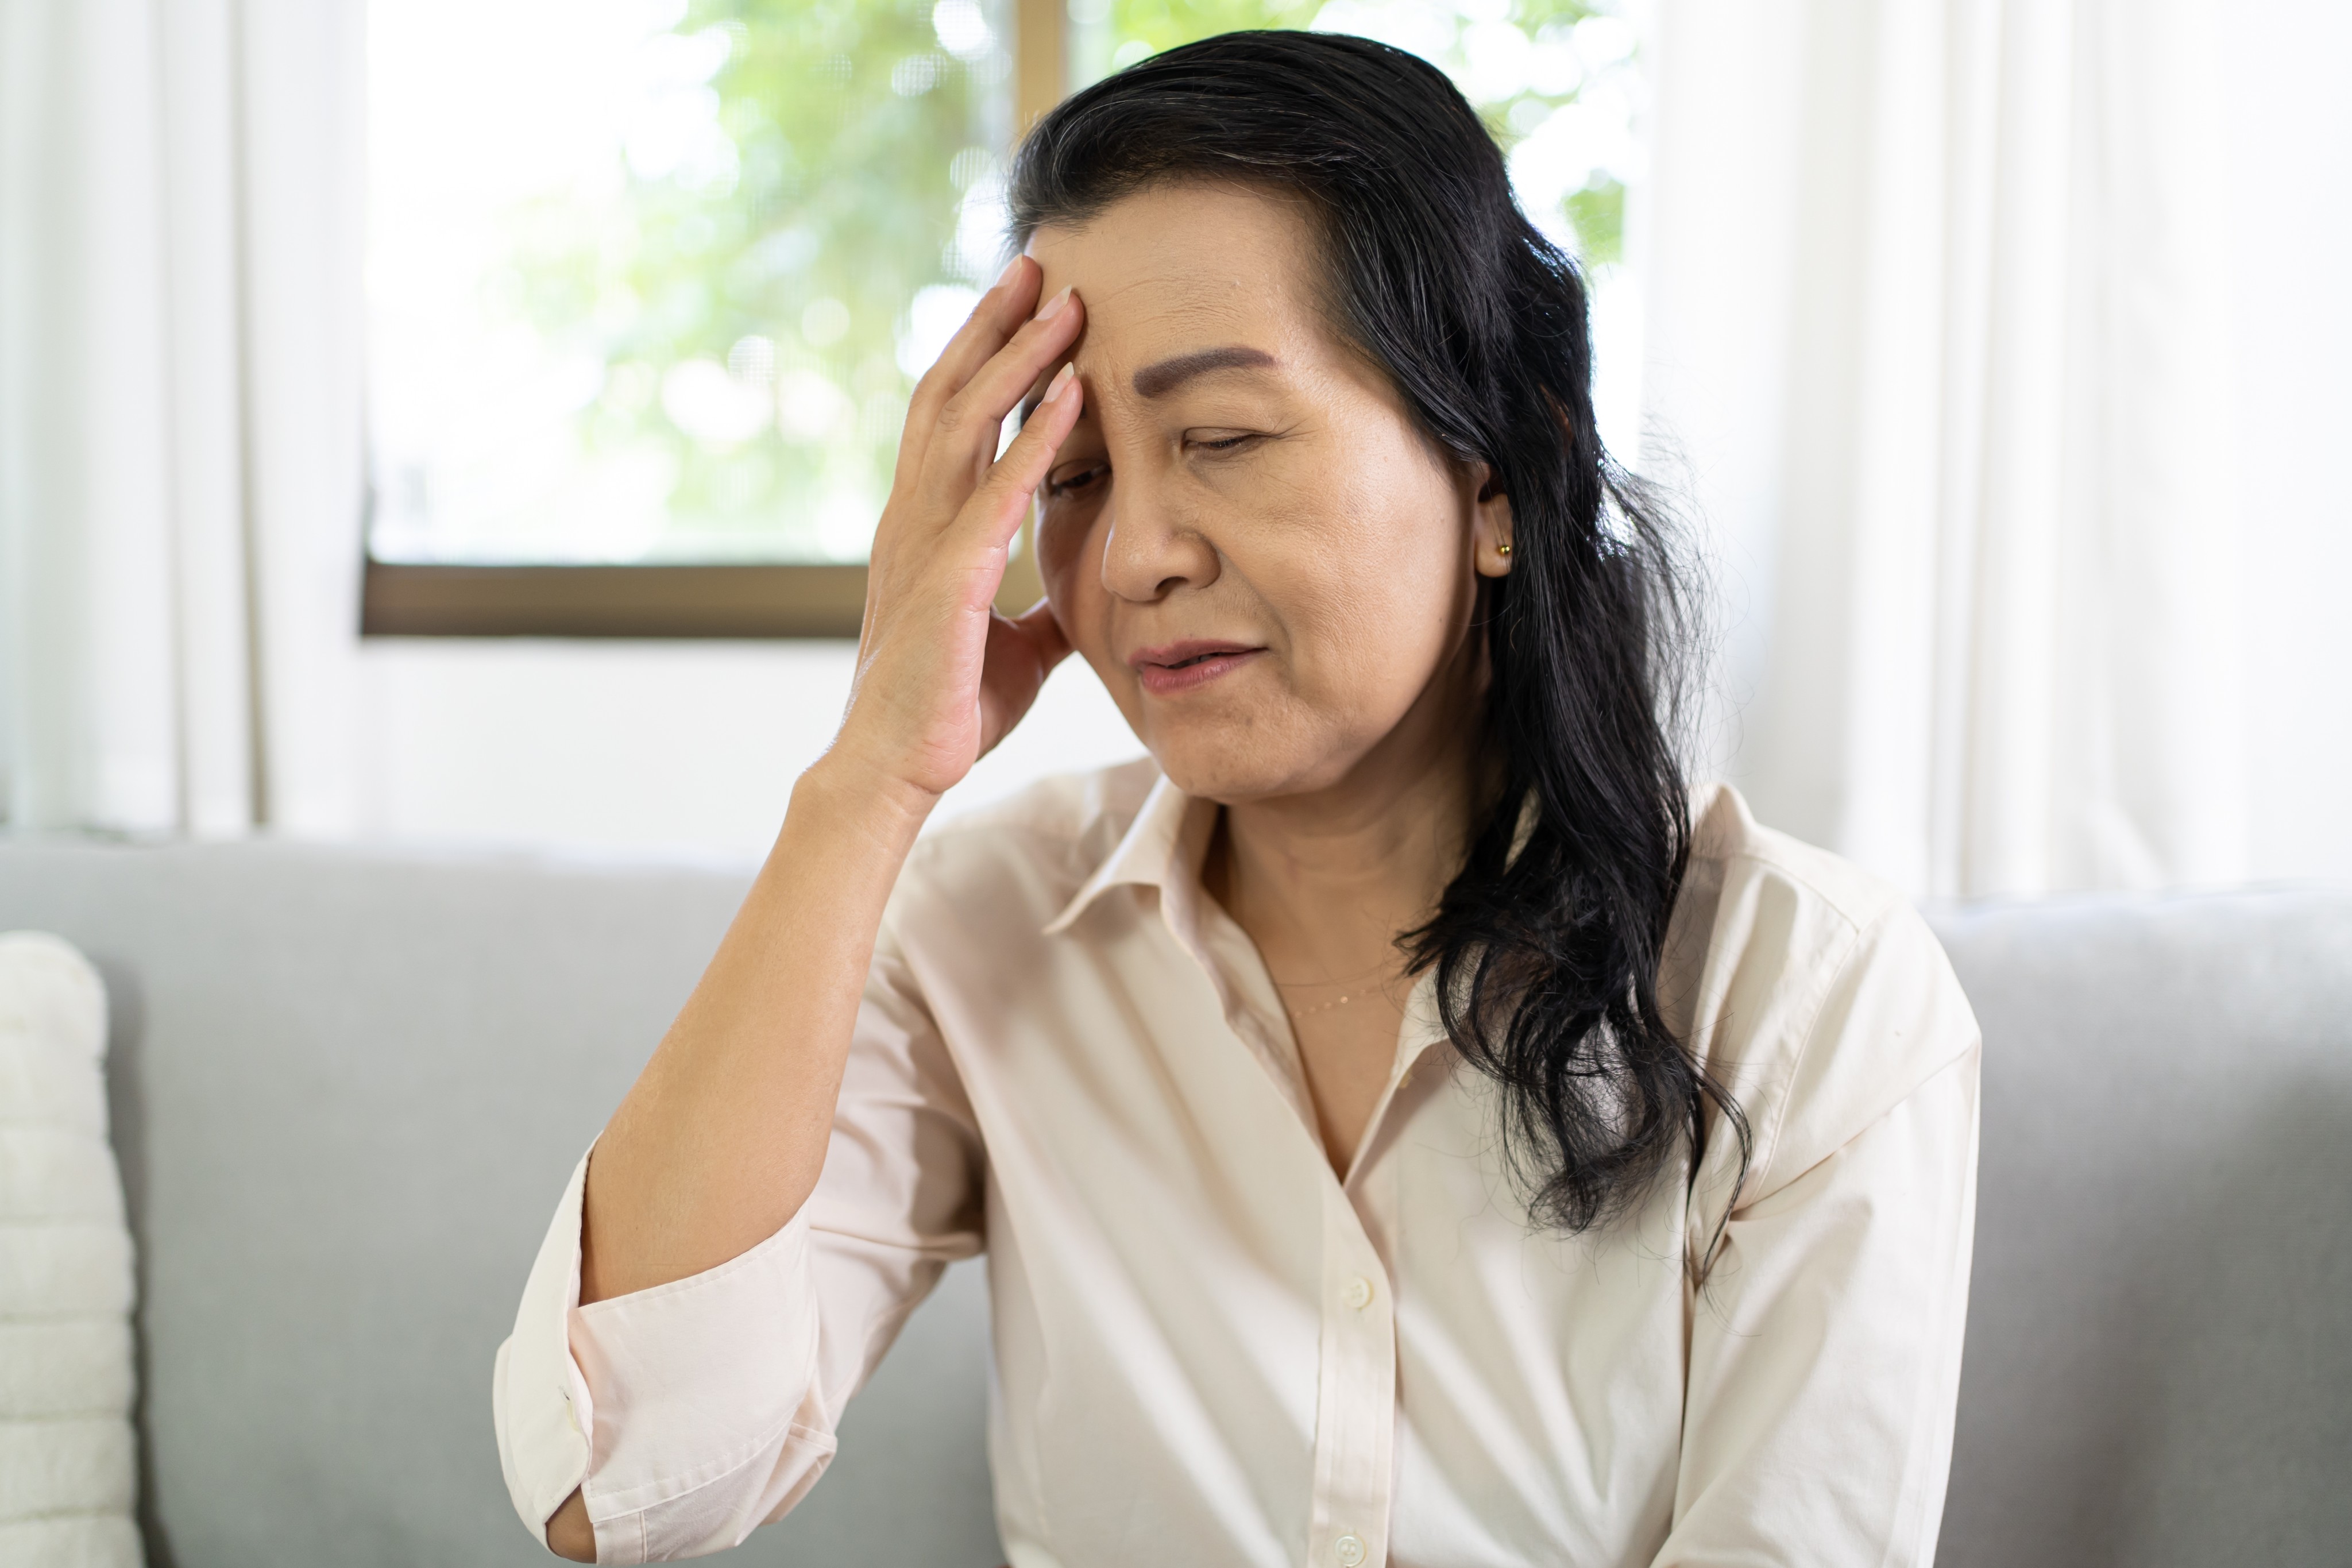 Covid-19 restrictions had a “real, lasting impact” on the brain health of people over 50, a study in the UK has found – raising questions about whether this puts them at increased risk of dementia. Photo: Shutterstock